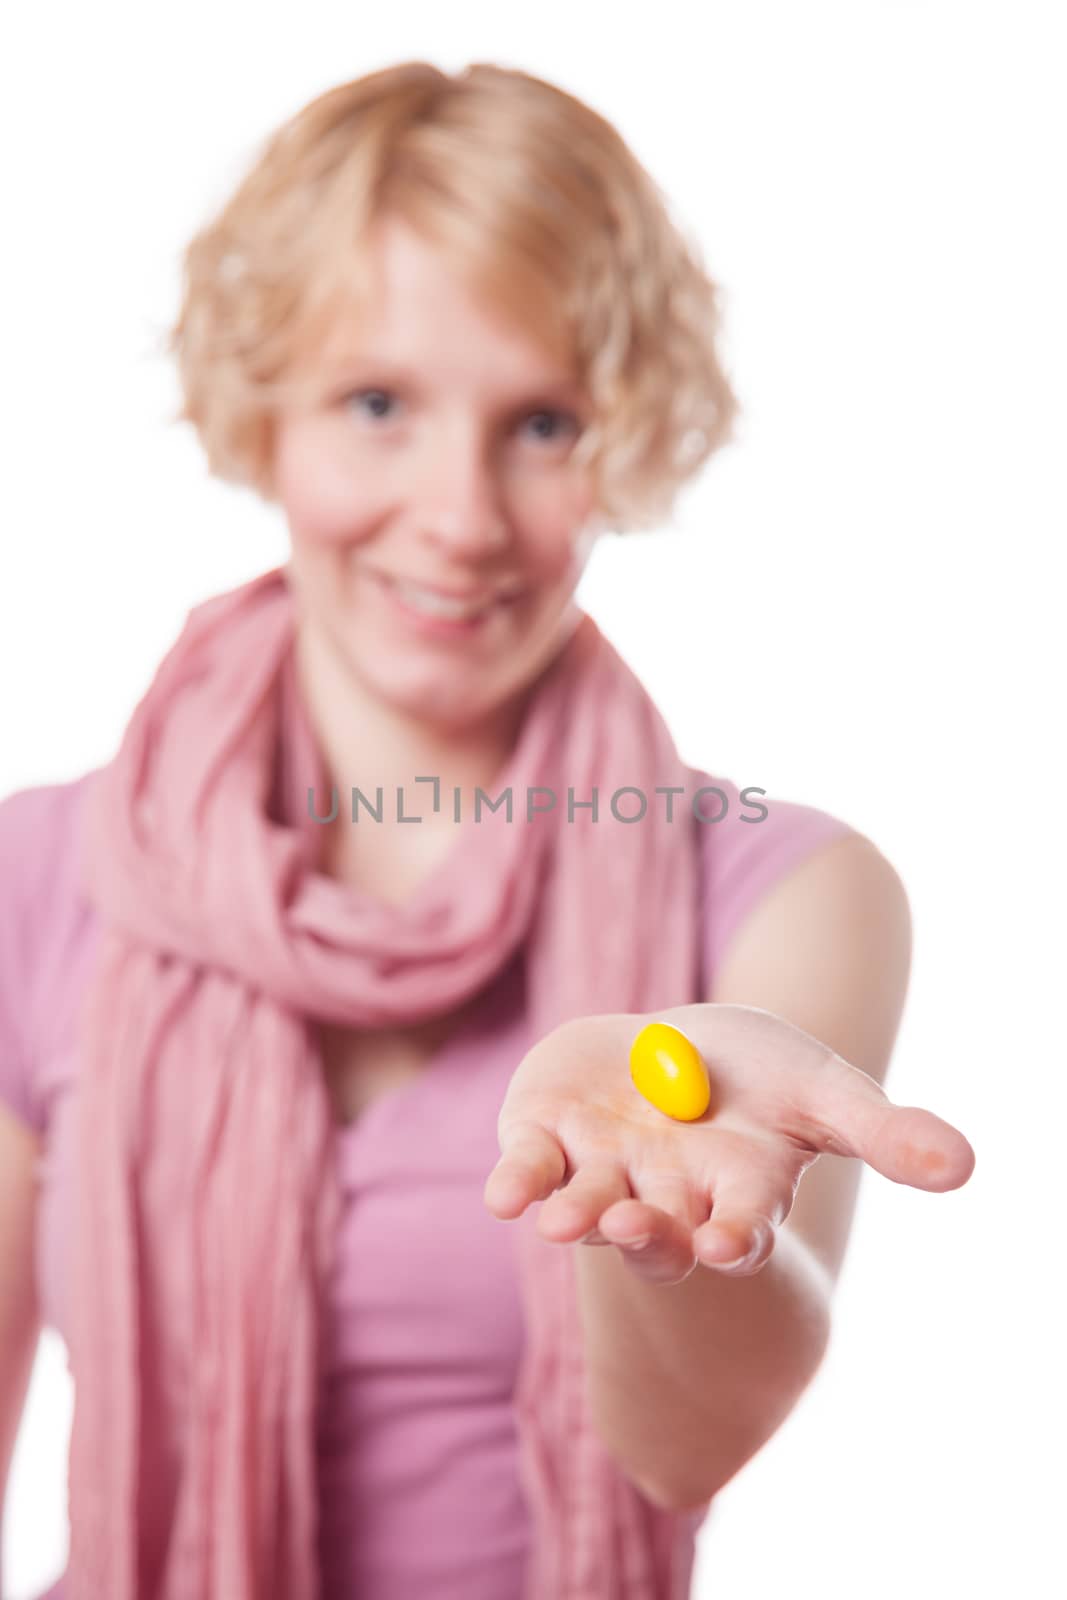 Young Woman Holding a Yellow Easter Egg in front of the Cameras - Isolated on White Background